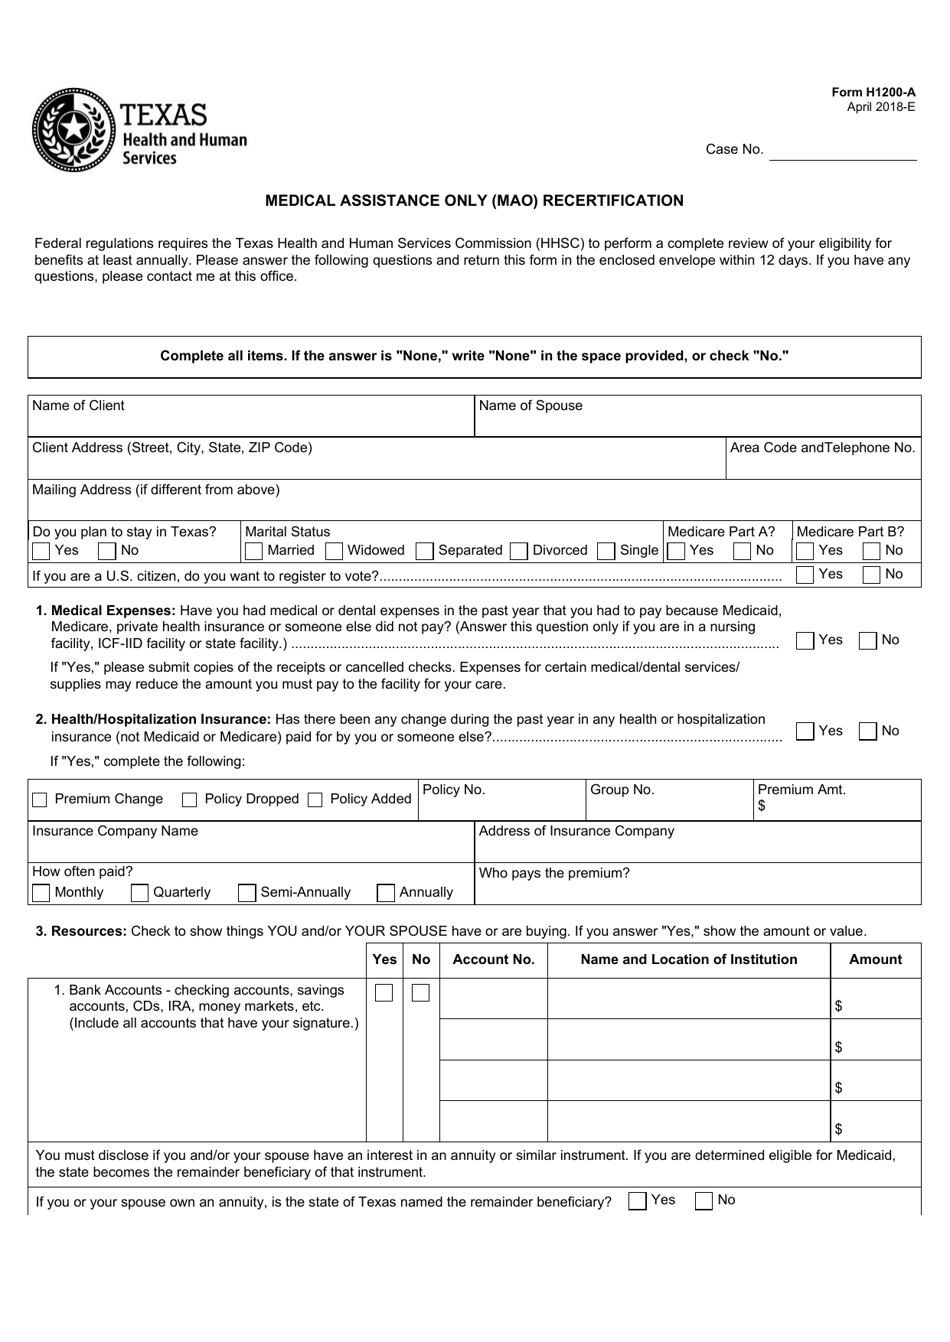 Form H1200-A Medical Assistance Only (Mao) Recertification - Texas, Page 1